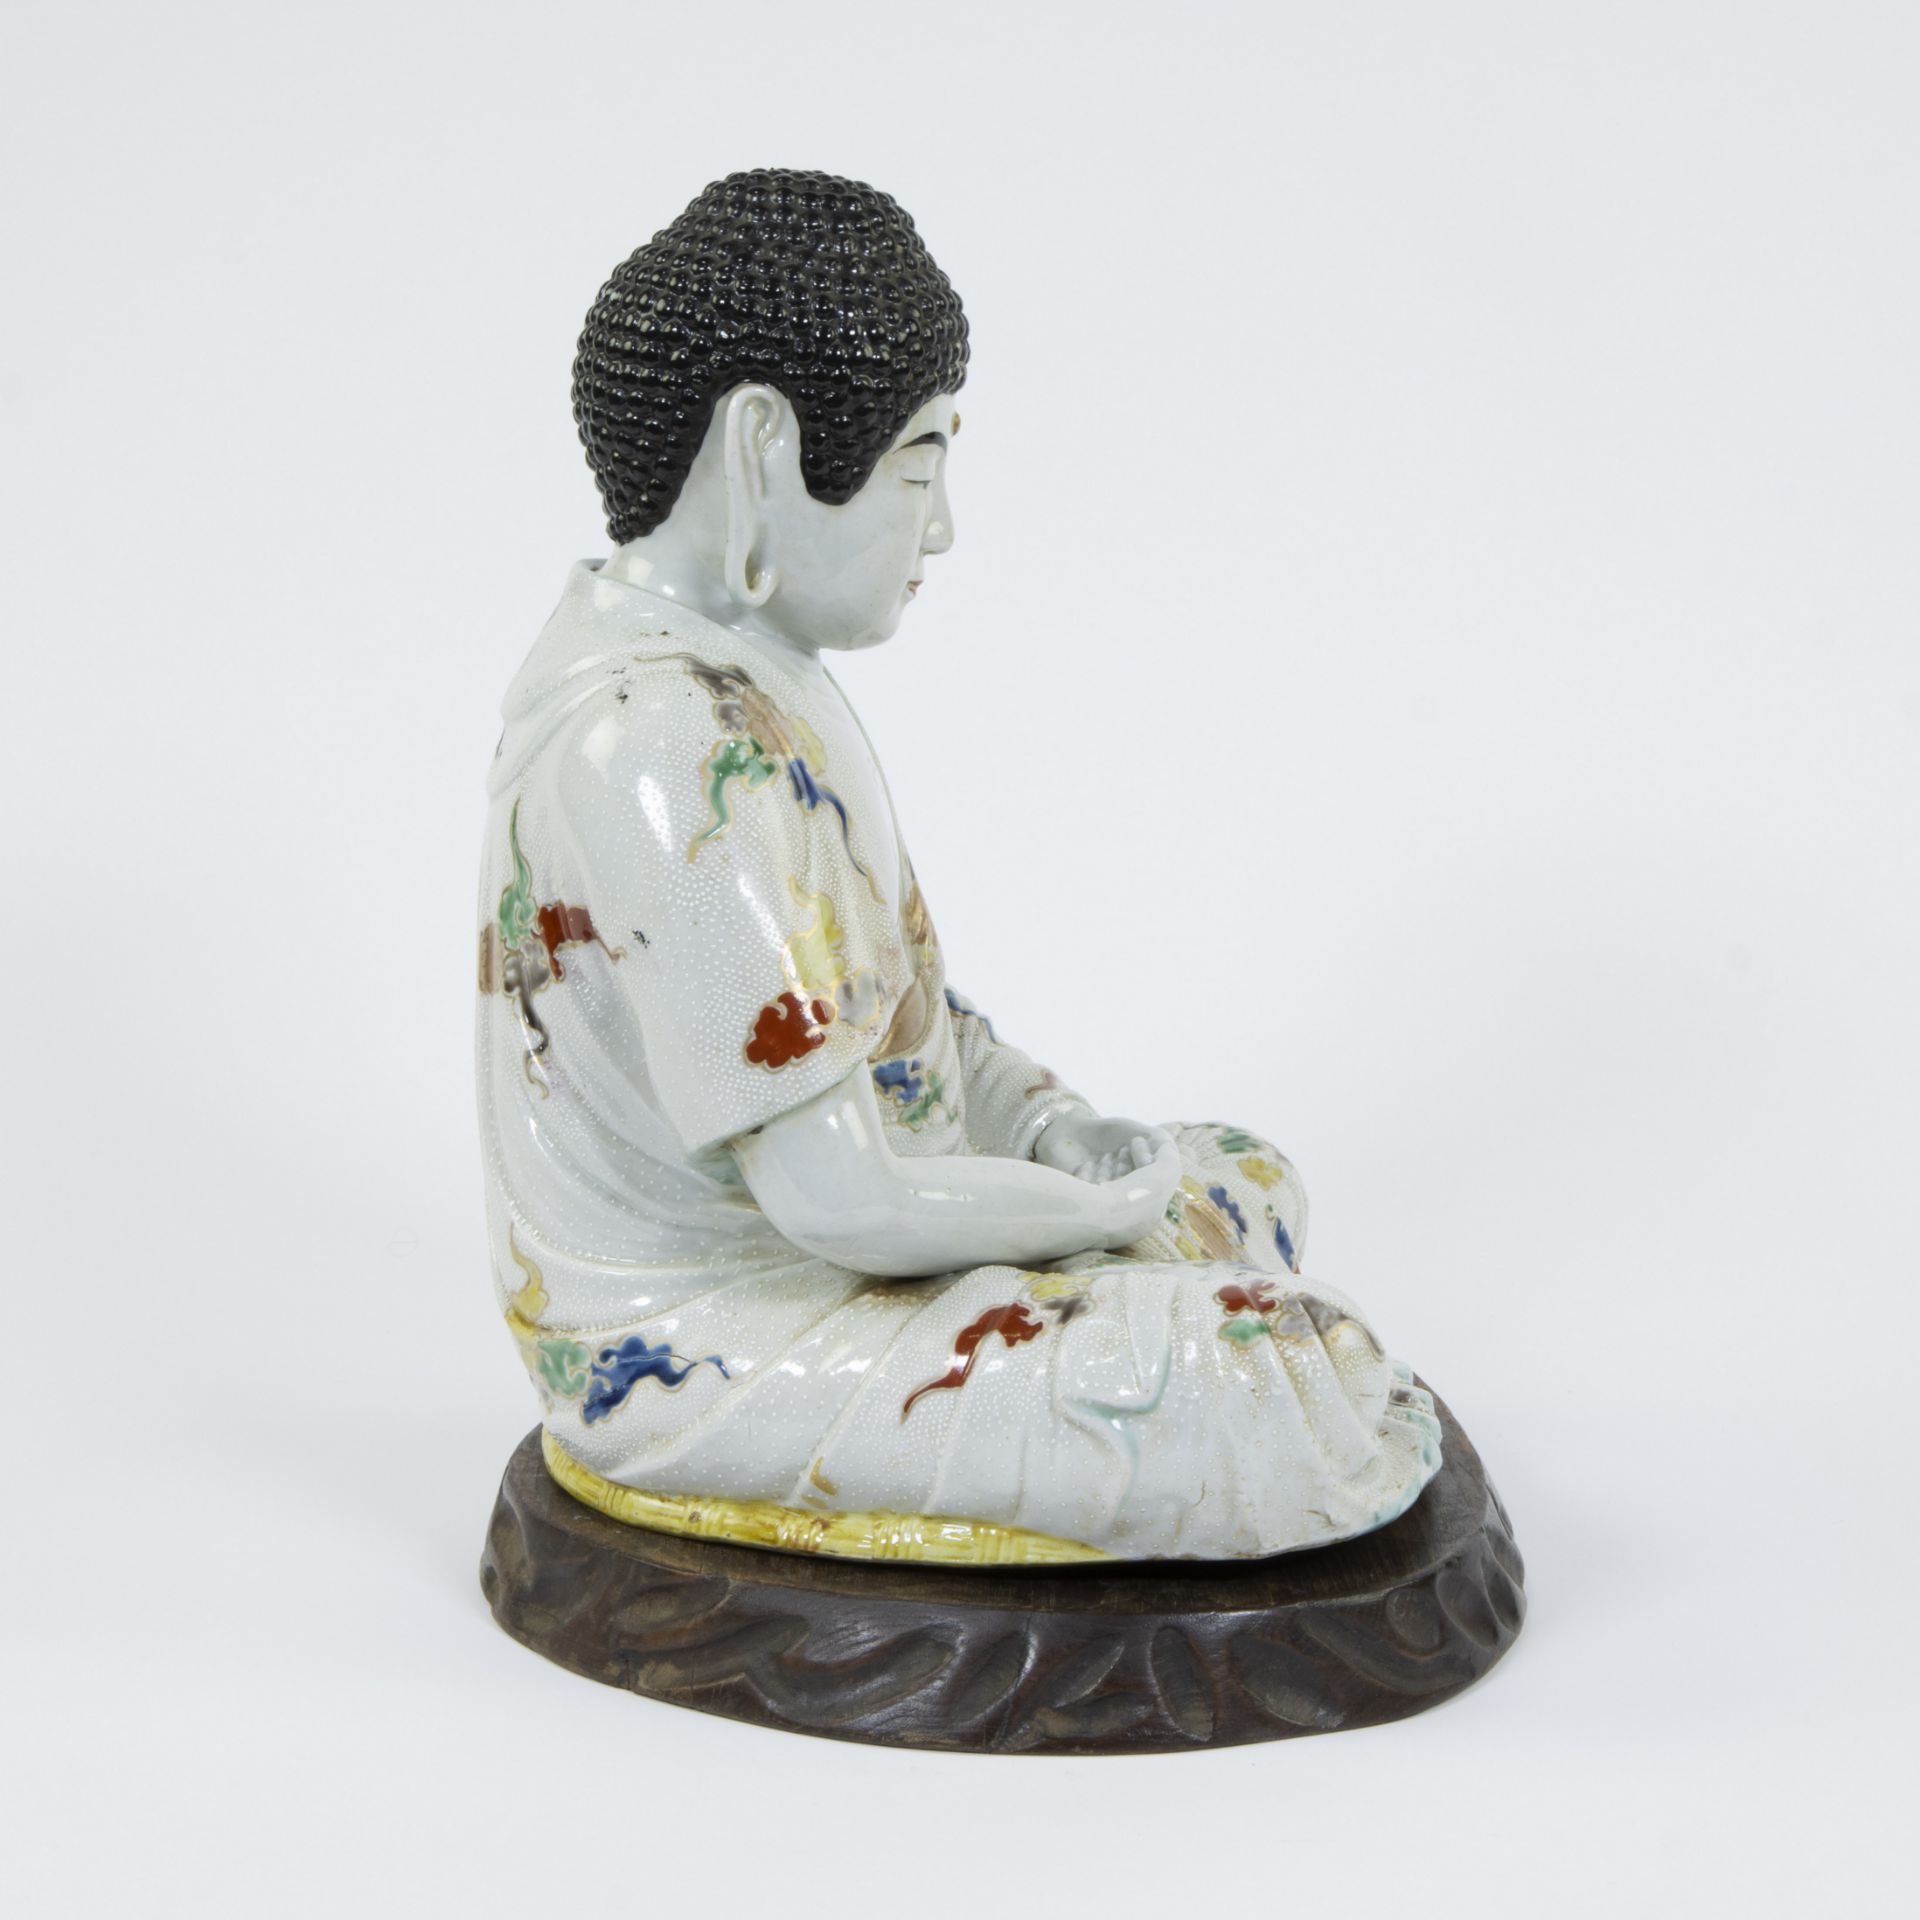 Japanese porcelain statue of a seated Buddha on wooden plinth, circa 1900s - Image 2 of 6